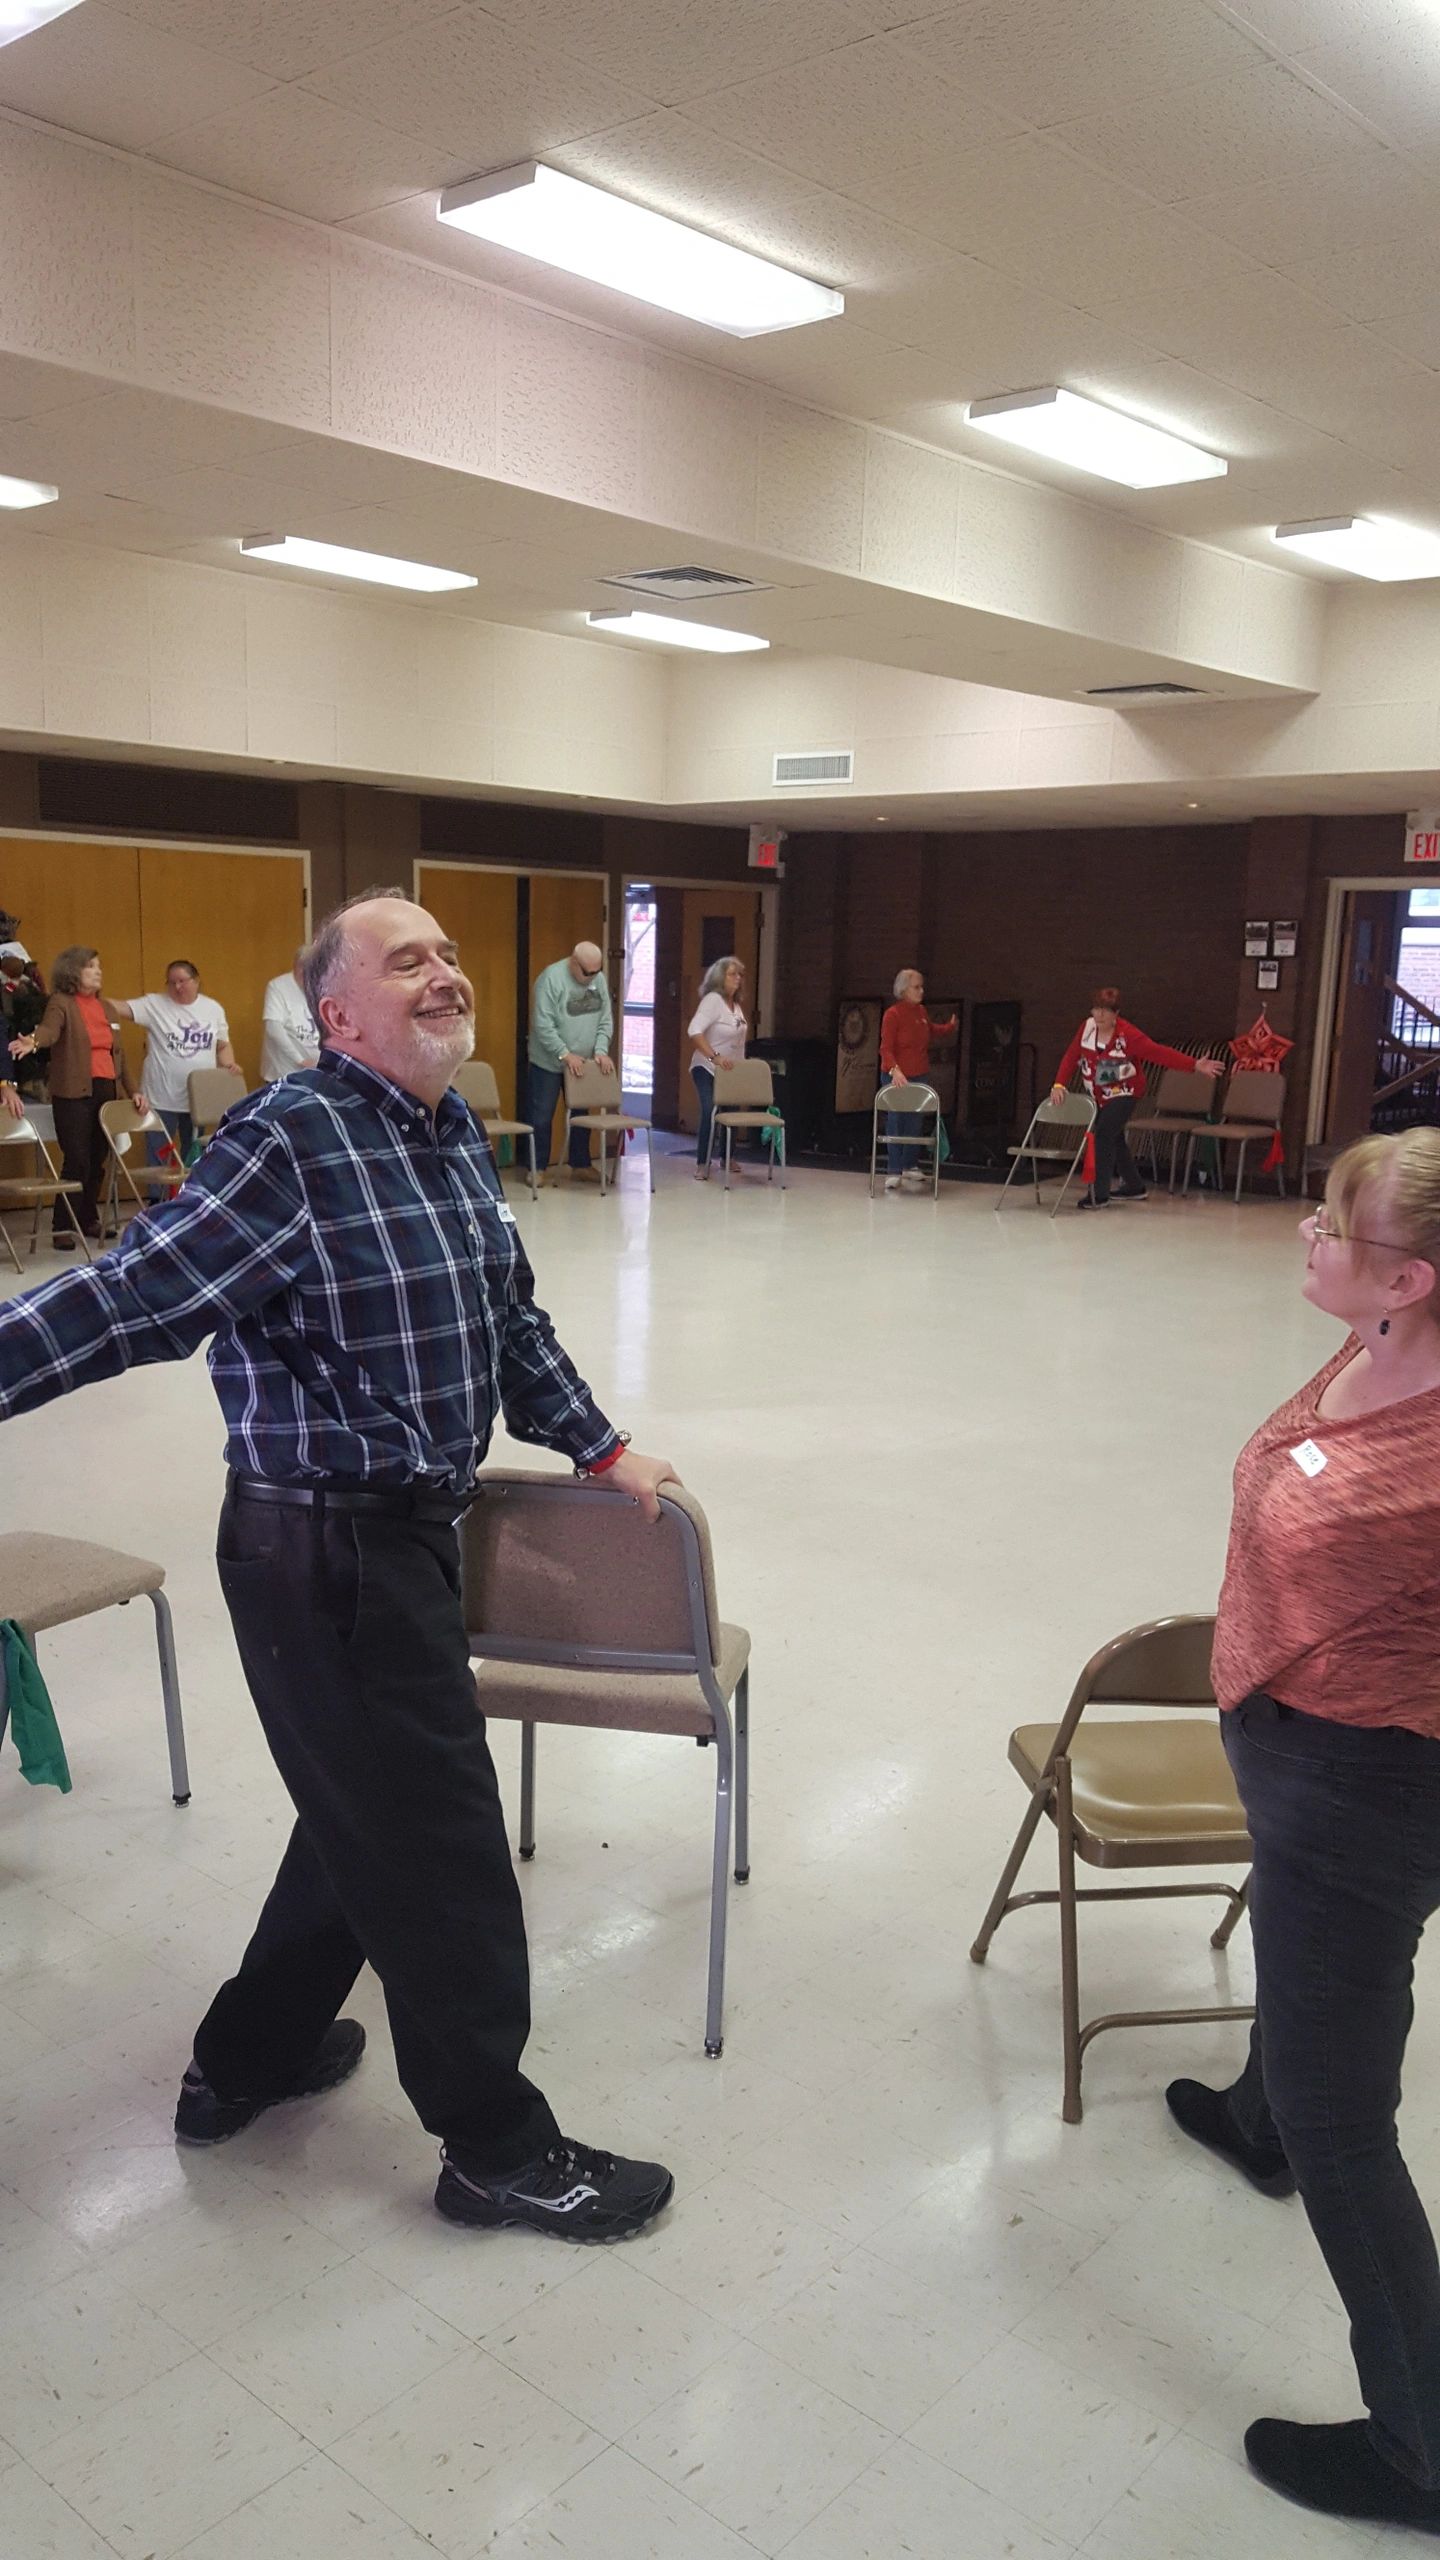 Dance Returns The 'Joy Of Movement' To People With Parkinson's